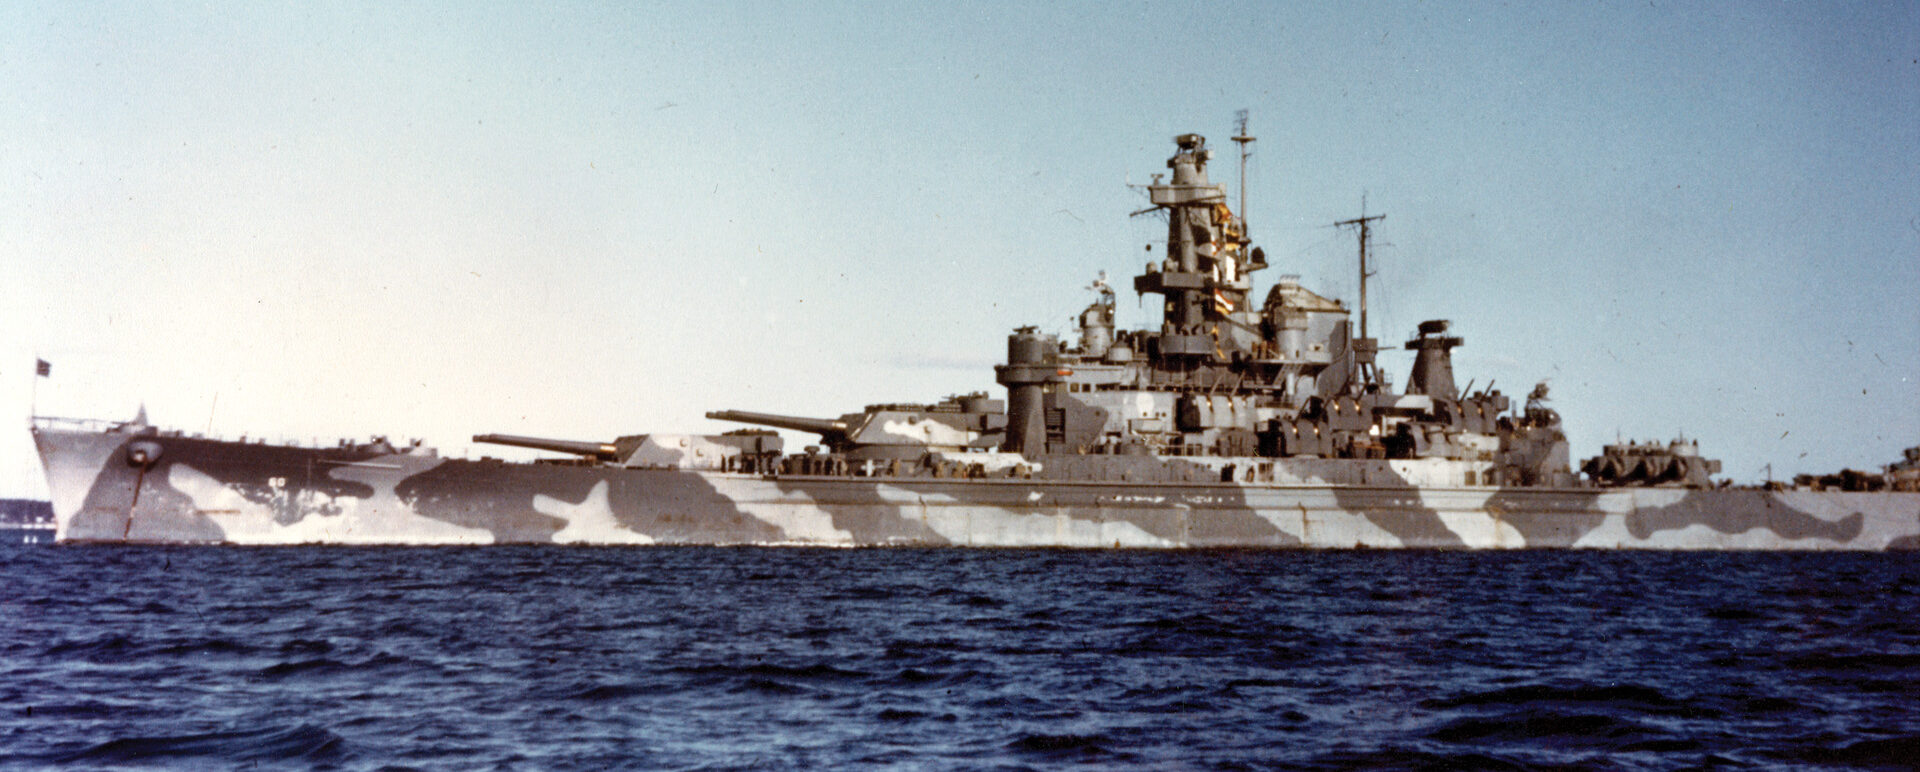 The USS Alabama (BB-60) was painted in dazzle Measure 12 camouflage.